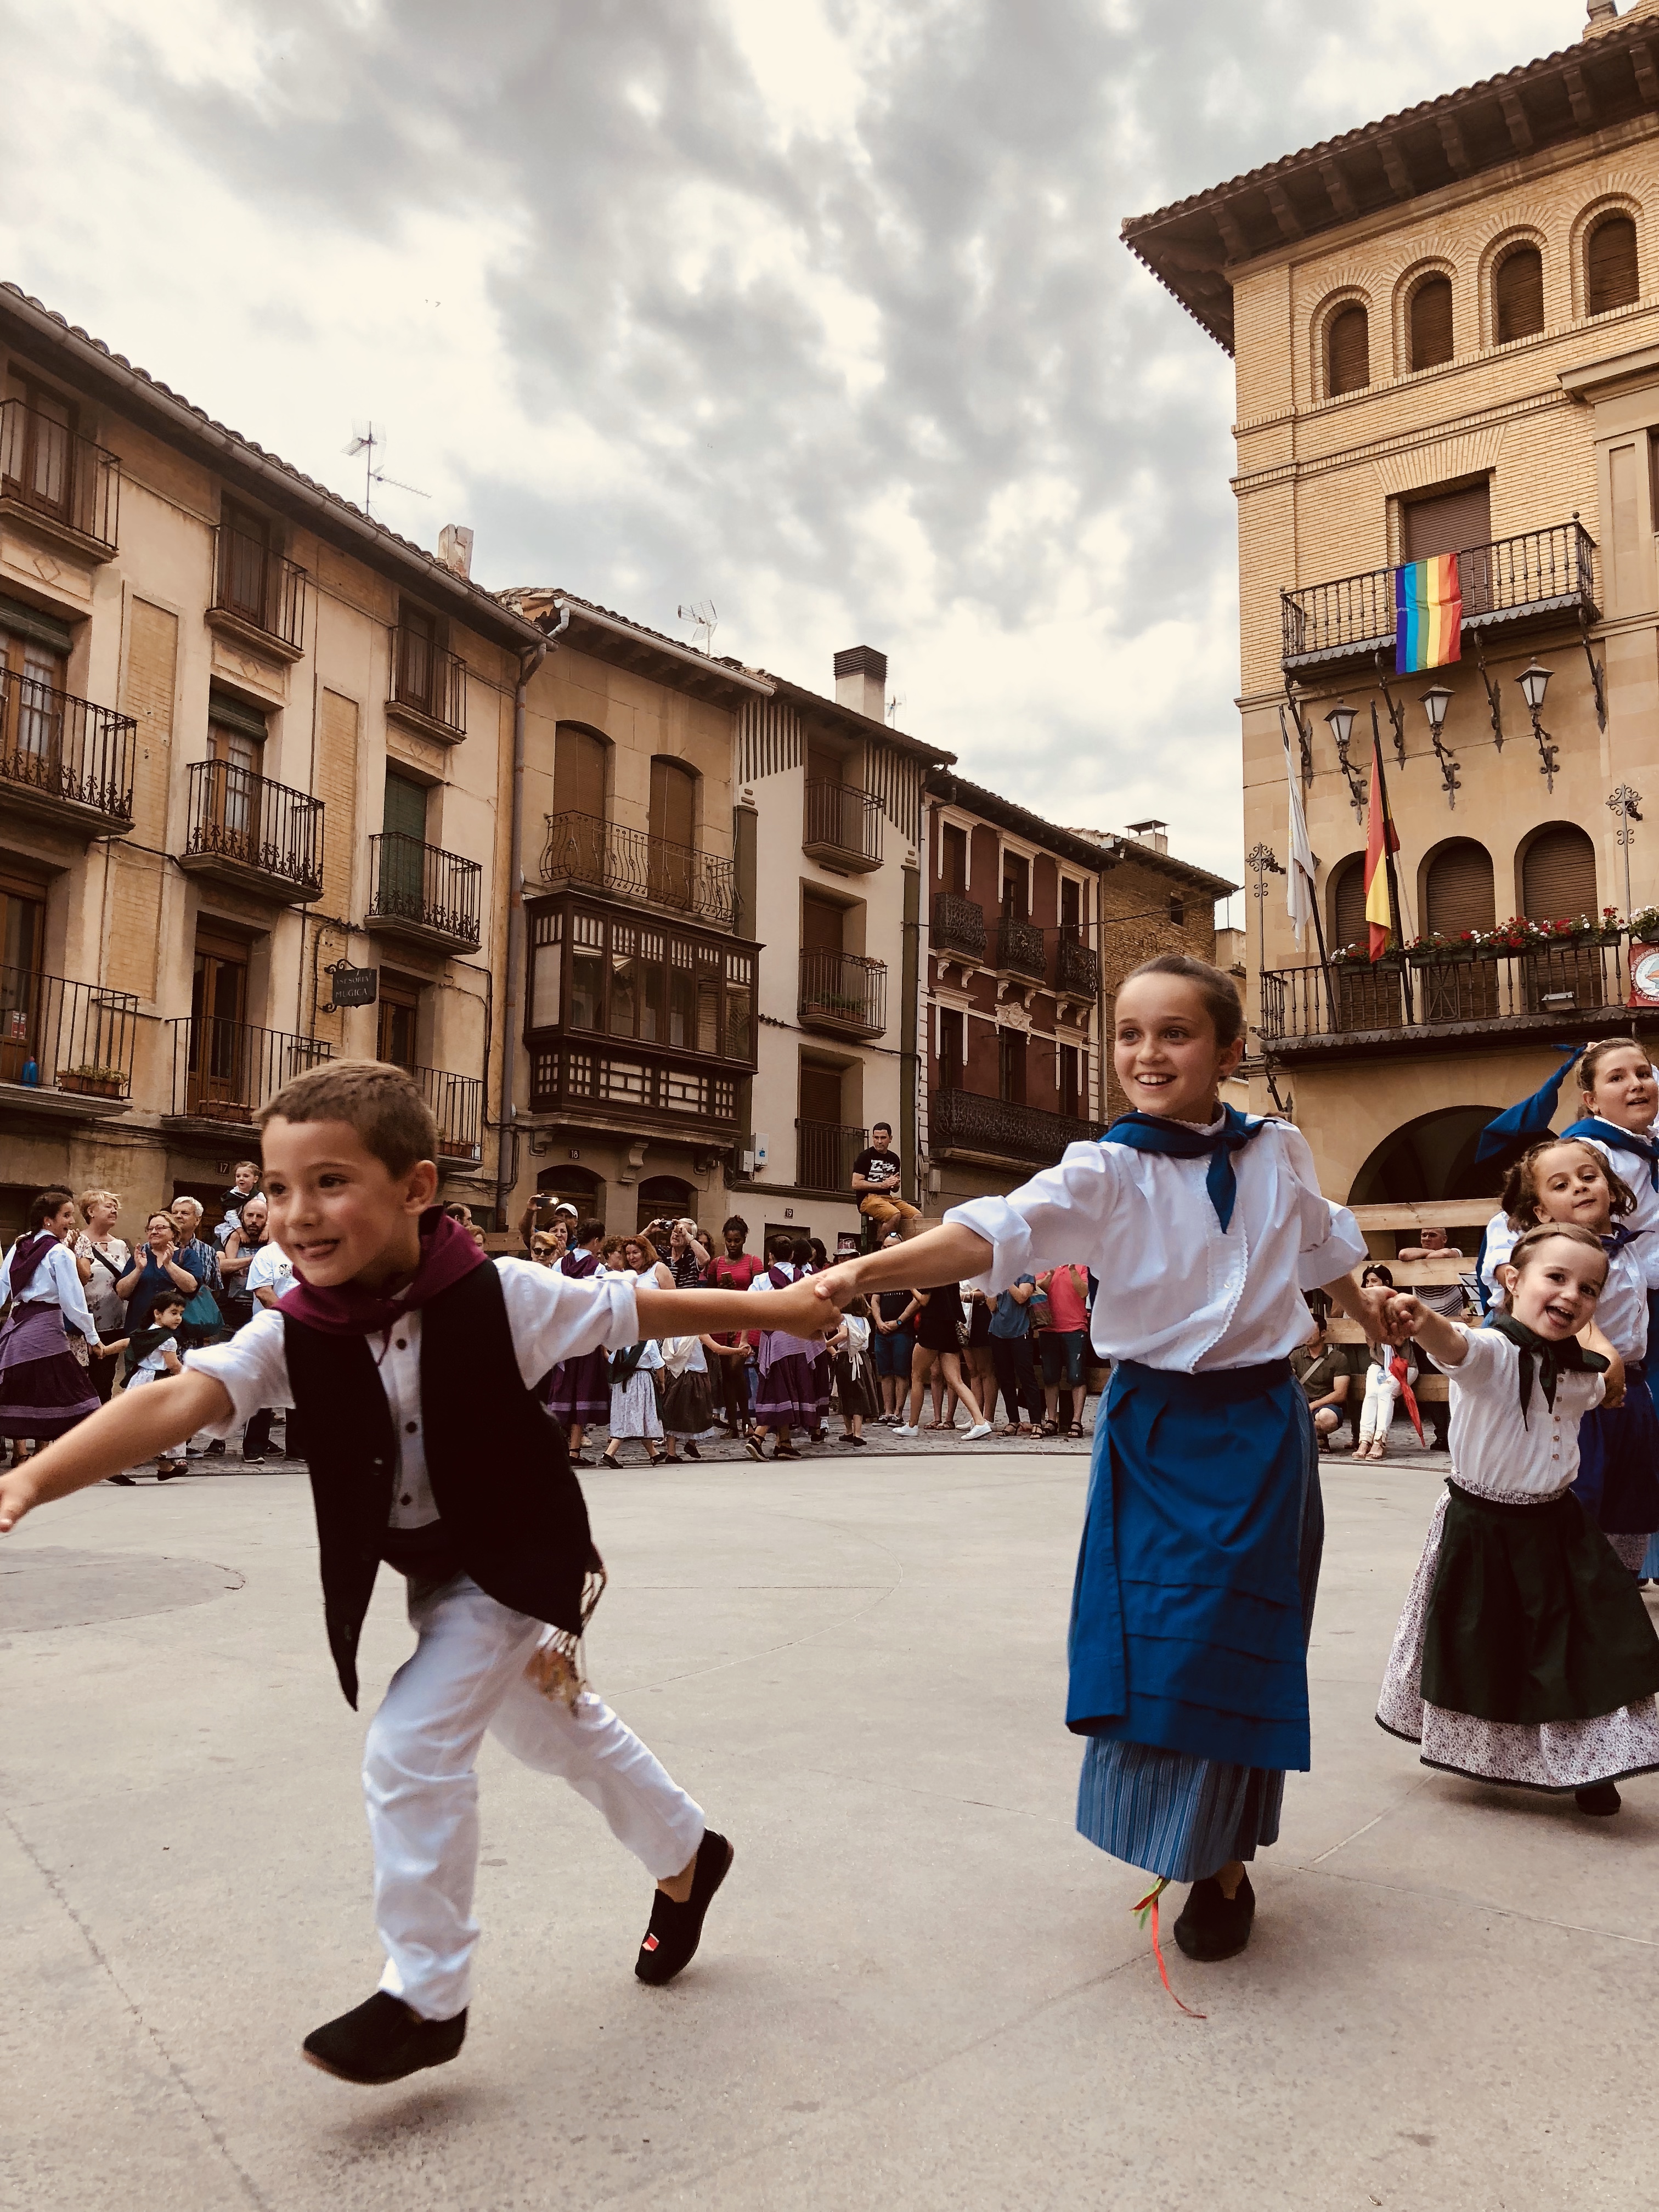 Kids dancing in the plaza